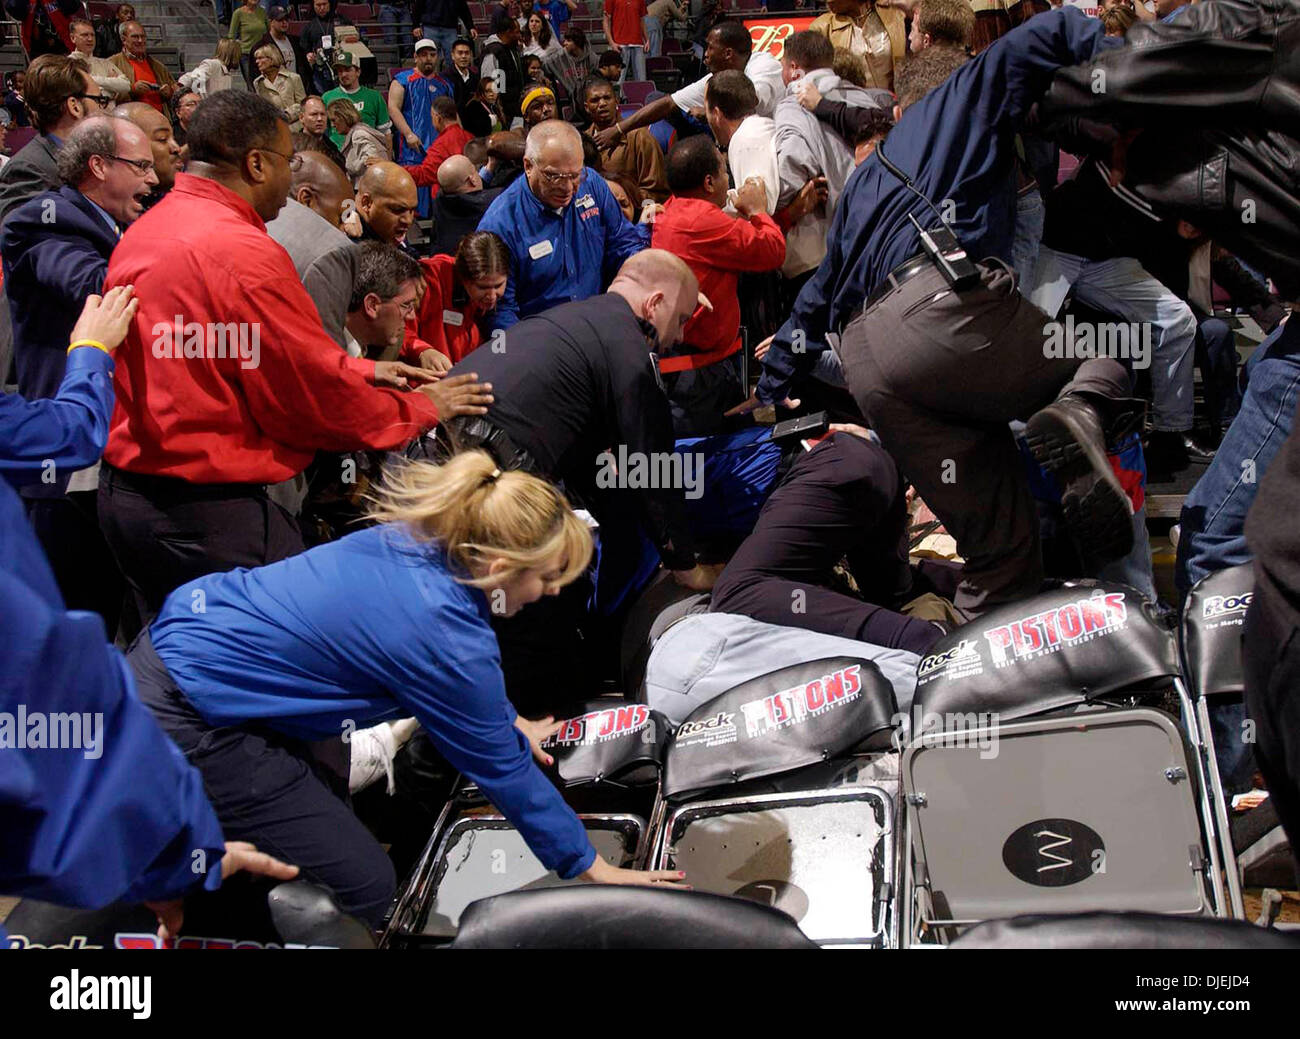 Nov 19, 2004; Auburn Hills, MI, USA; Palace Security rush into the stands to separate Pacers players and fans duringr a brawl near the end of the Detroit Pistons vs Indiana Pacers game in Auburn Hills, Michigan. Stock Photo